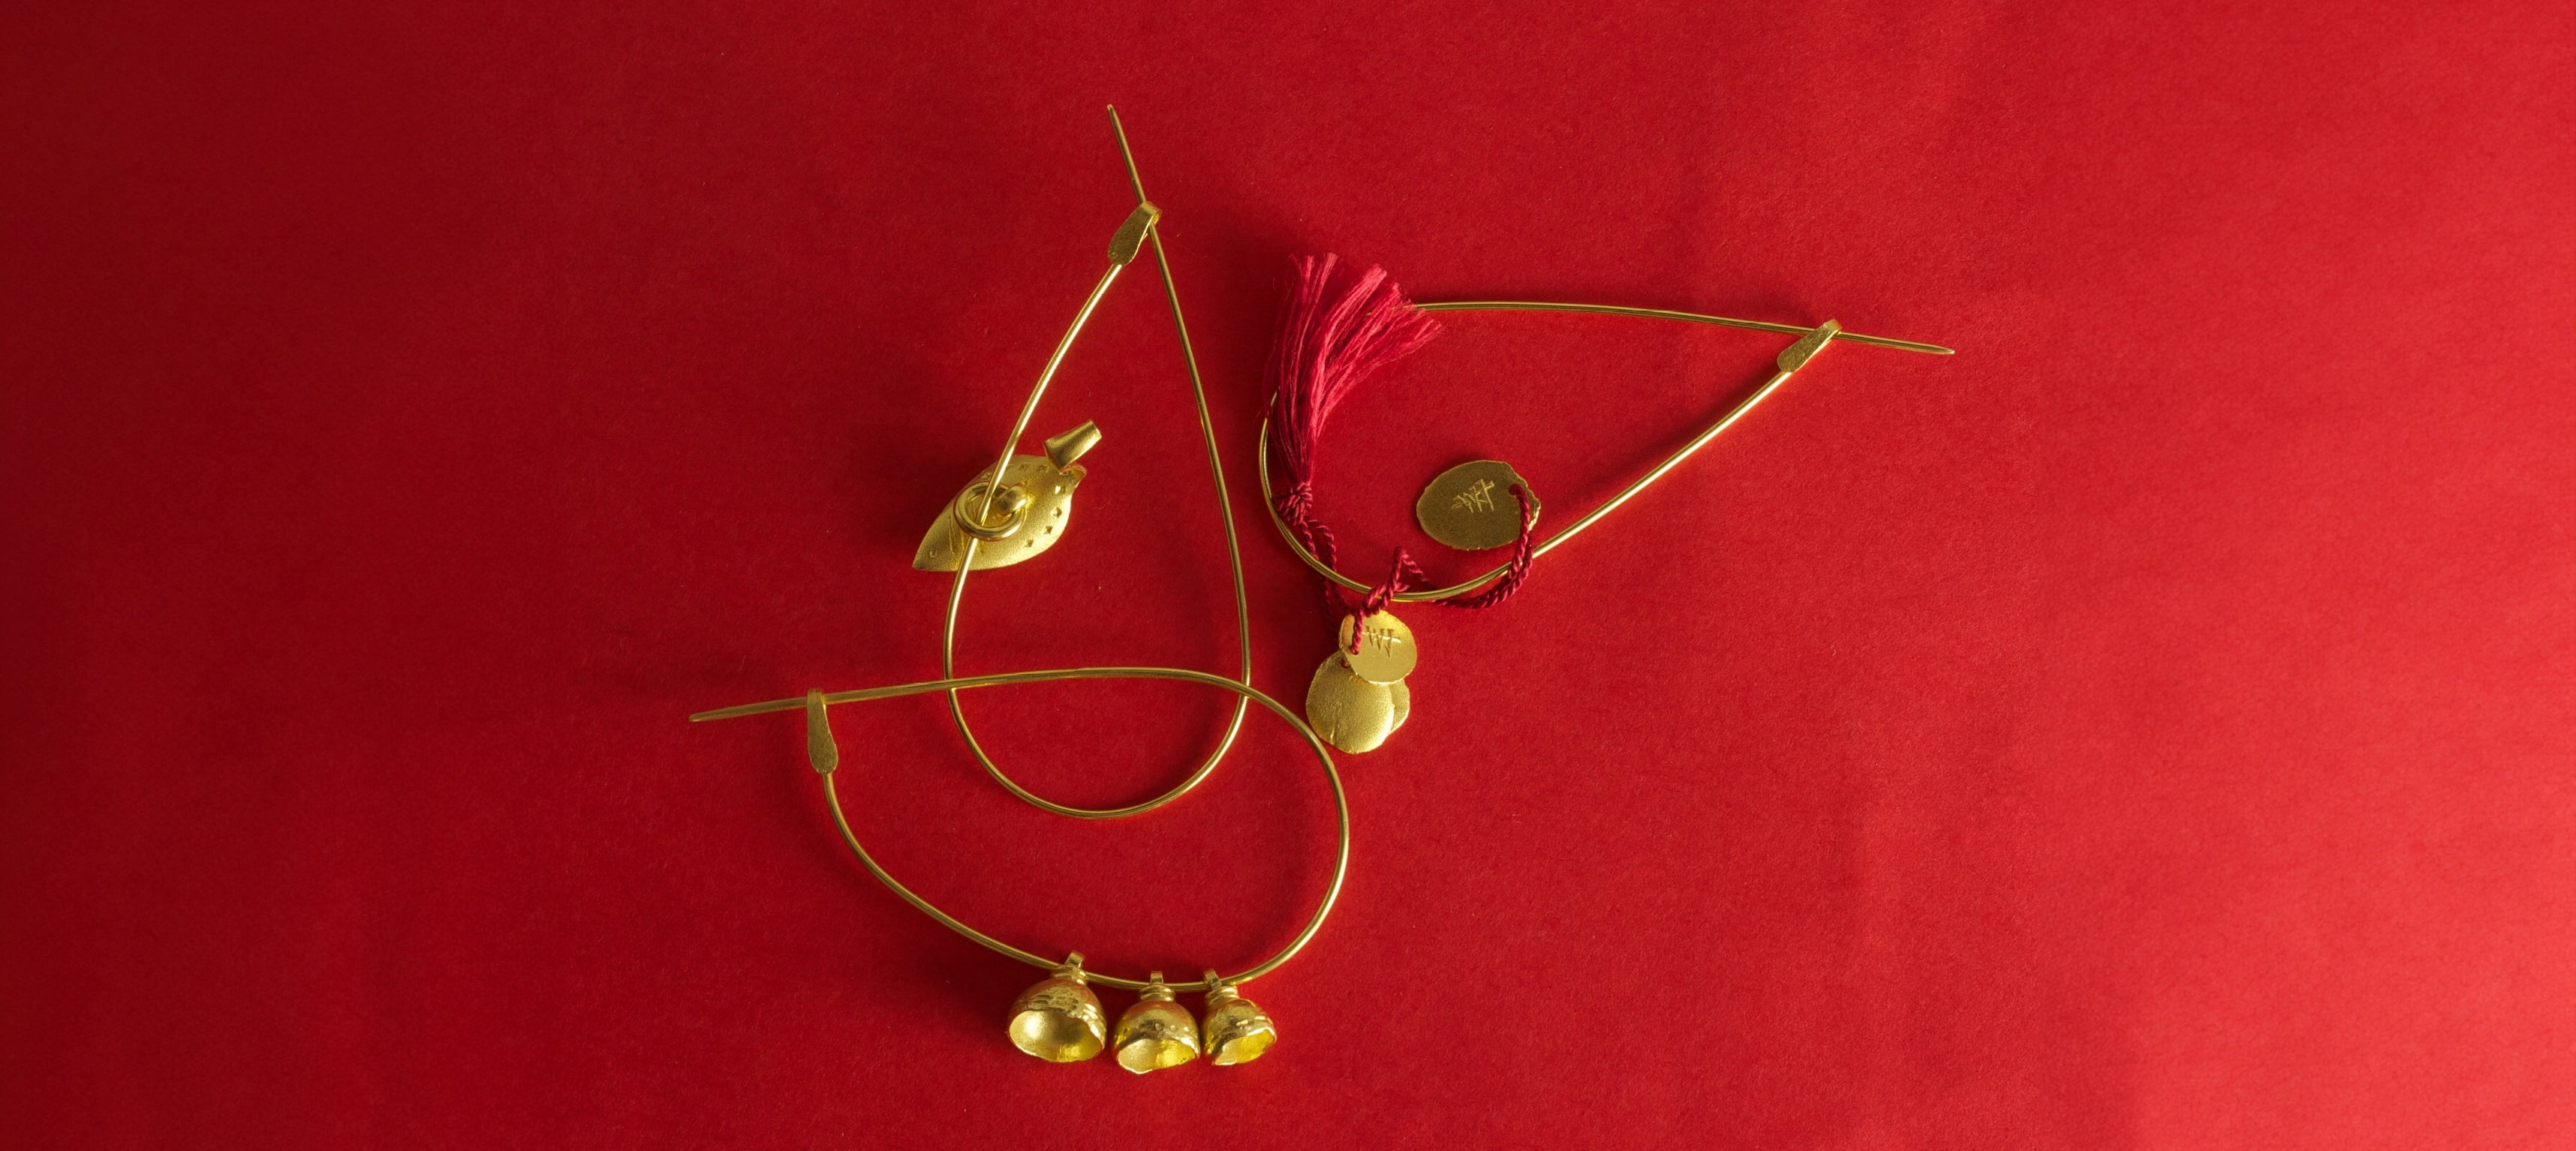 Wright & Teague Nuba pins. 18ct Fairtrade gold. On a red background.